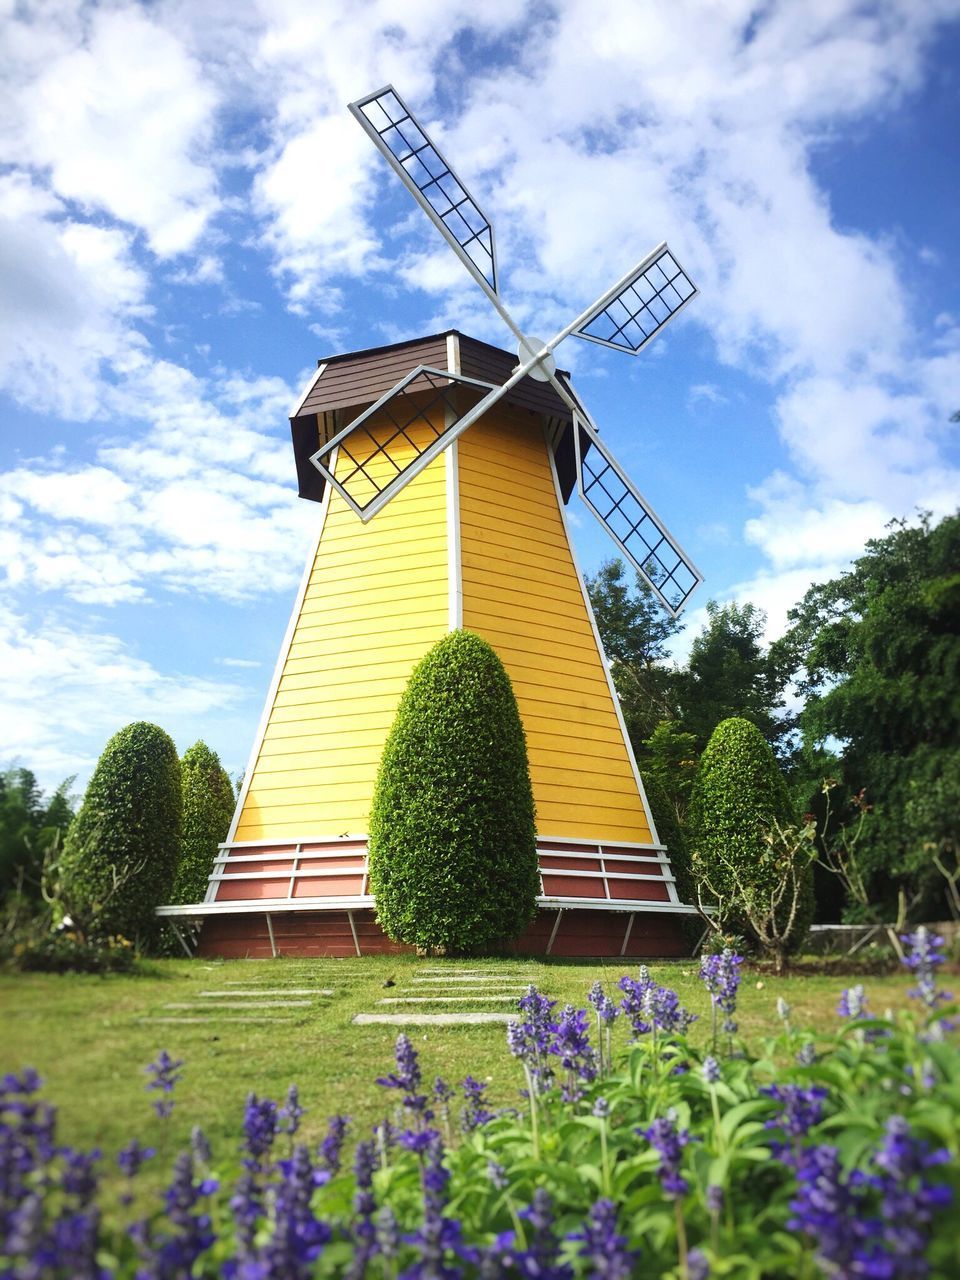 TRADITIONAL WINDMILL ON FIELD AGAINST SKY